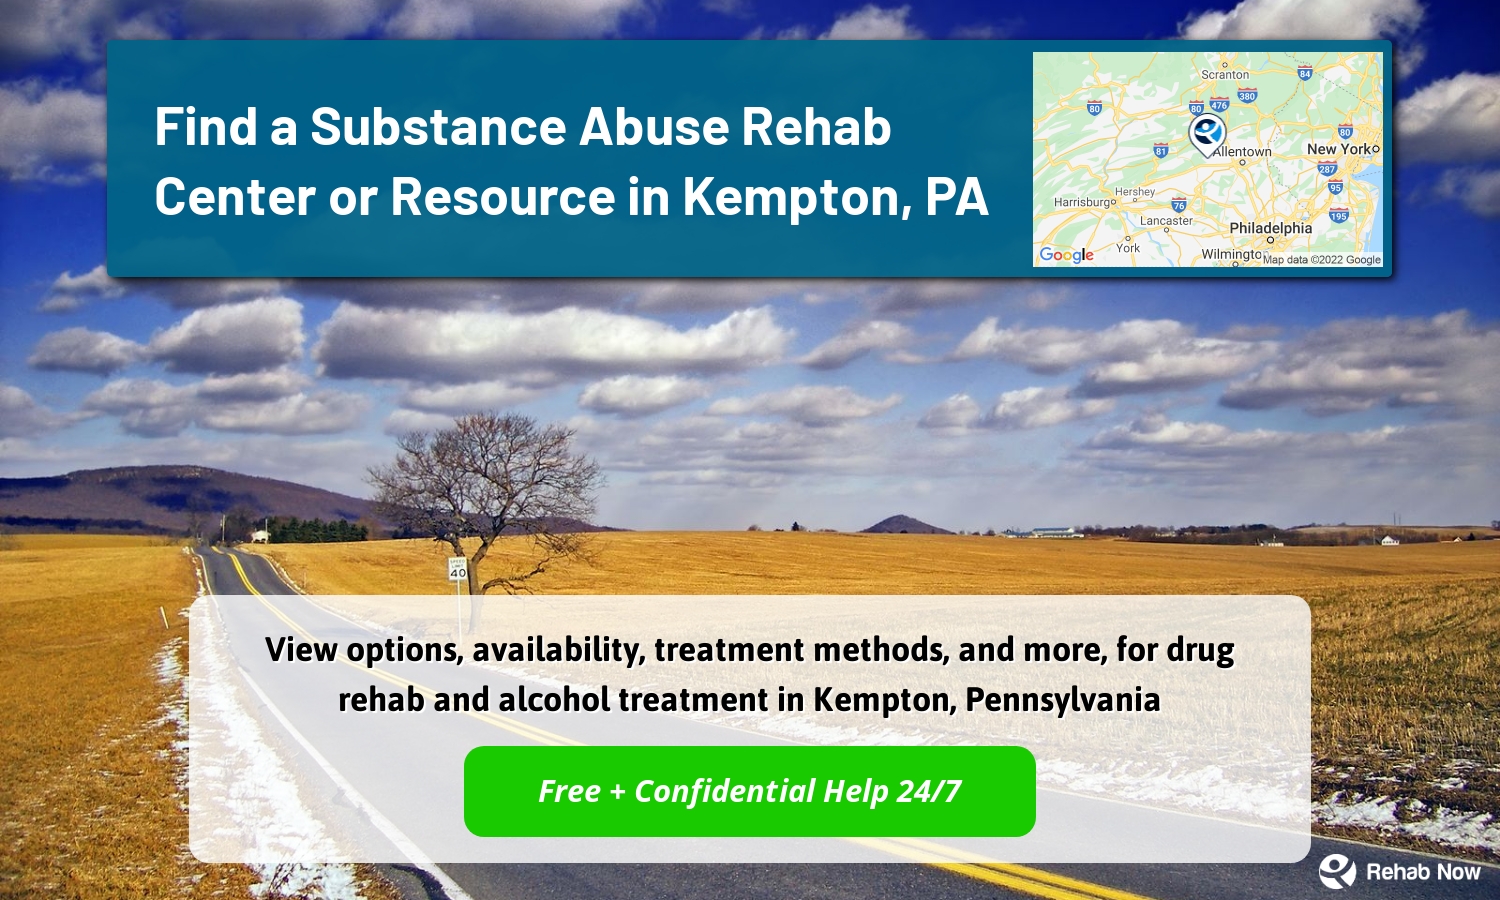 View options, availability, treatment methods, and more, for drug rehab and alcohol treatment in Kempton, Pennsylvania